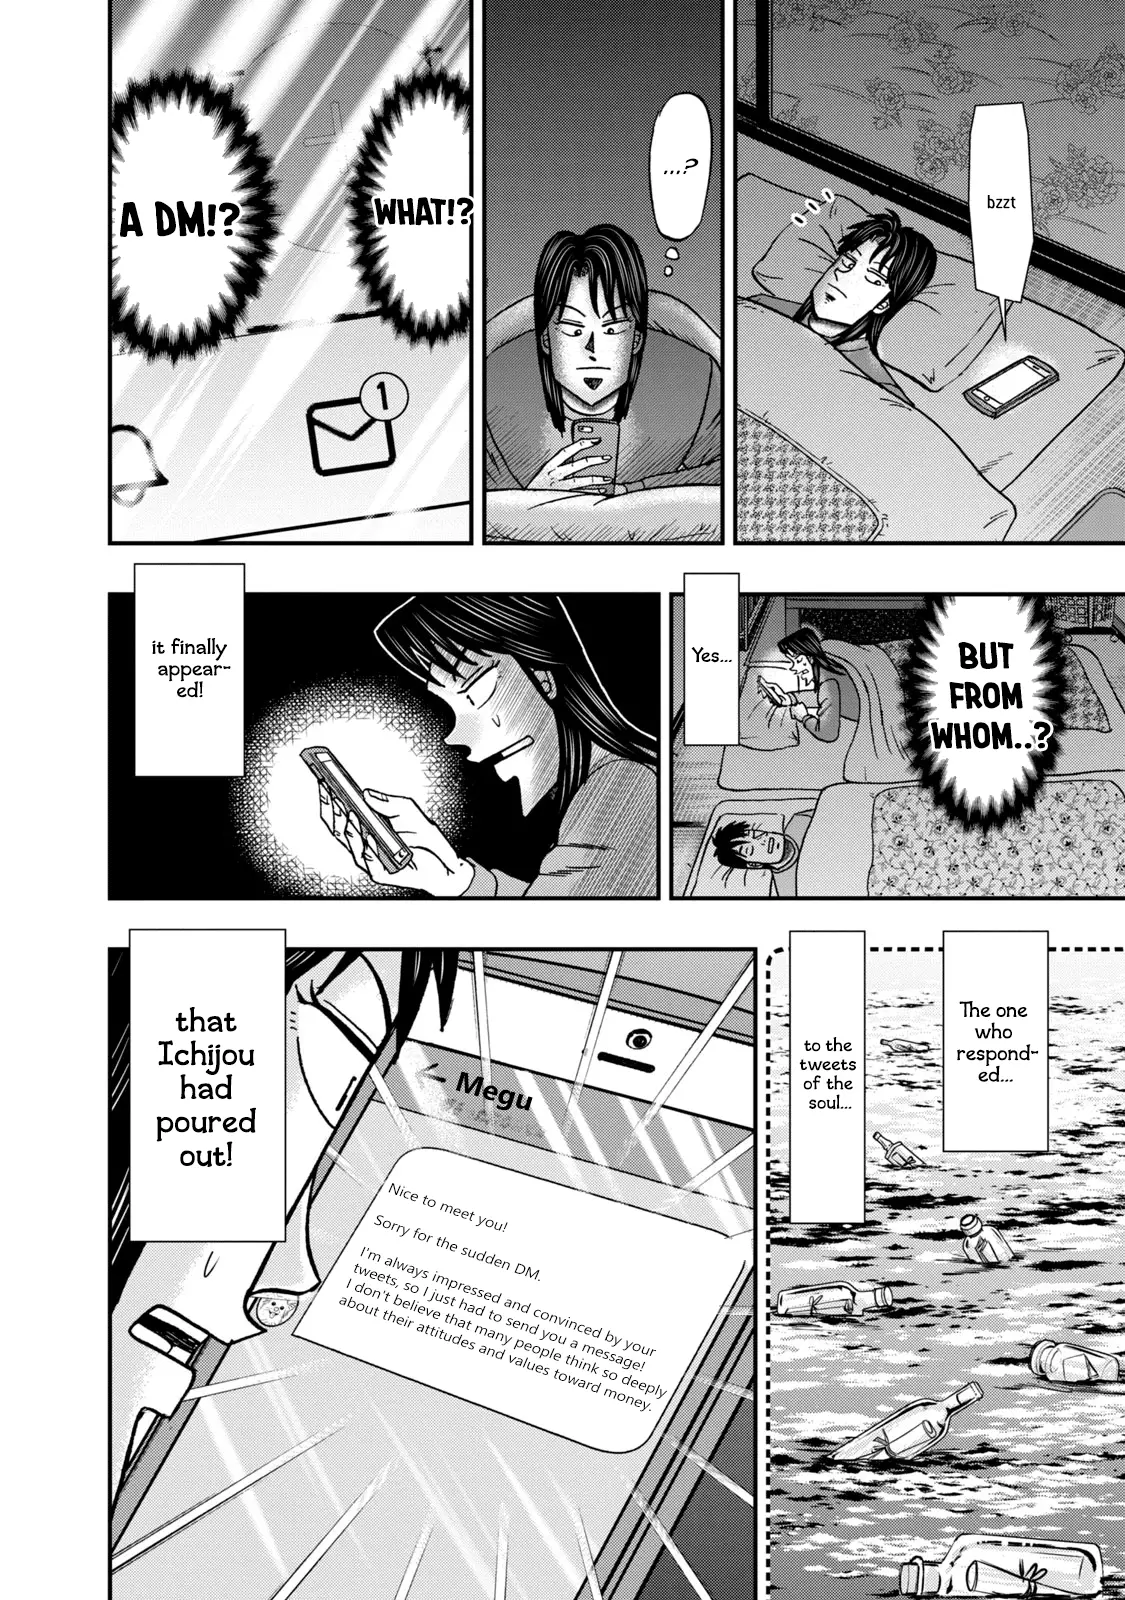 Life In Tokyo Ichijou - 12 page 6-9ad4fb98